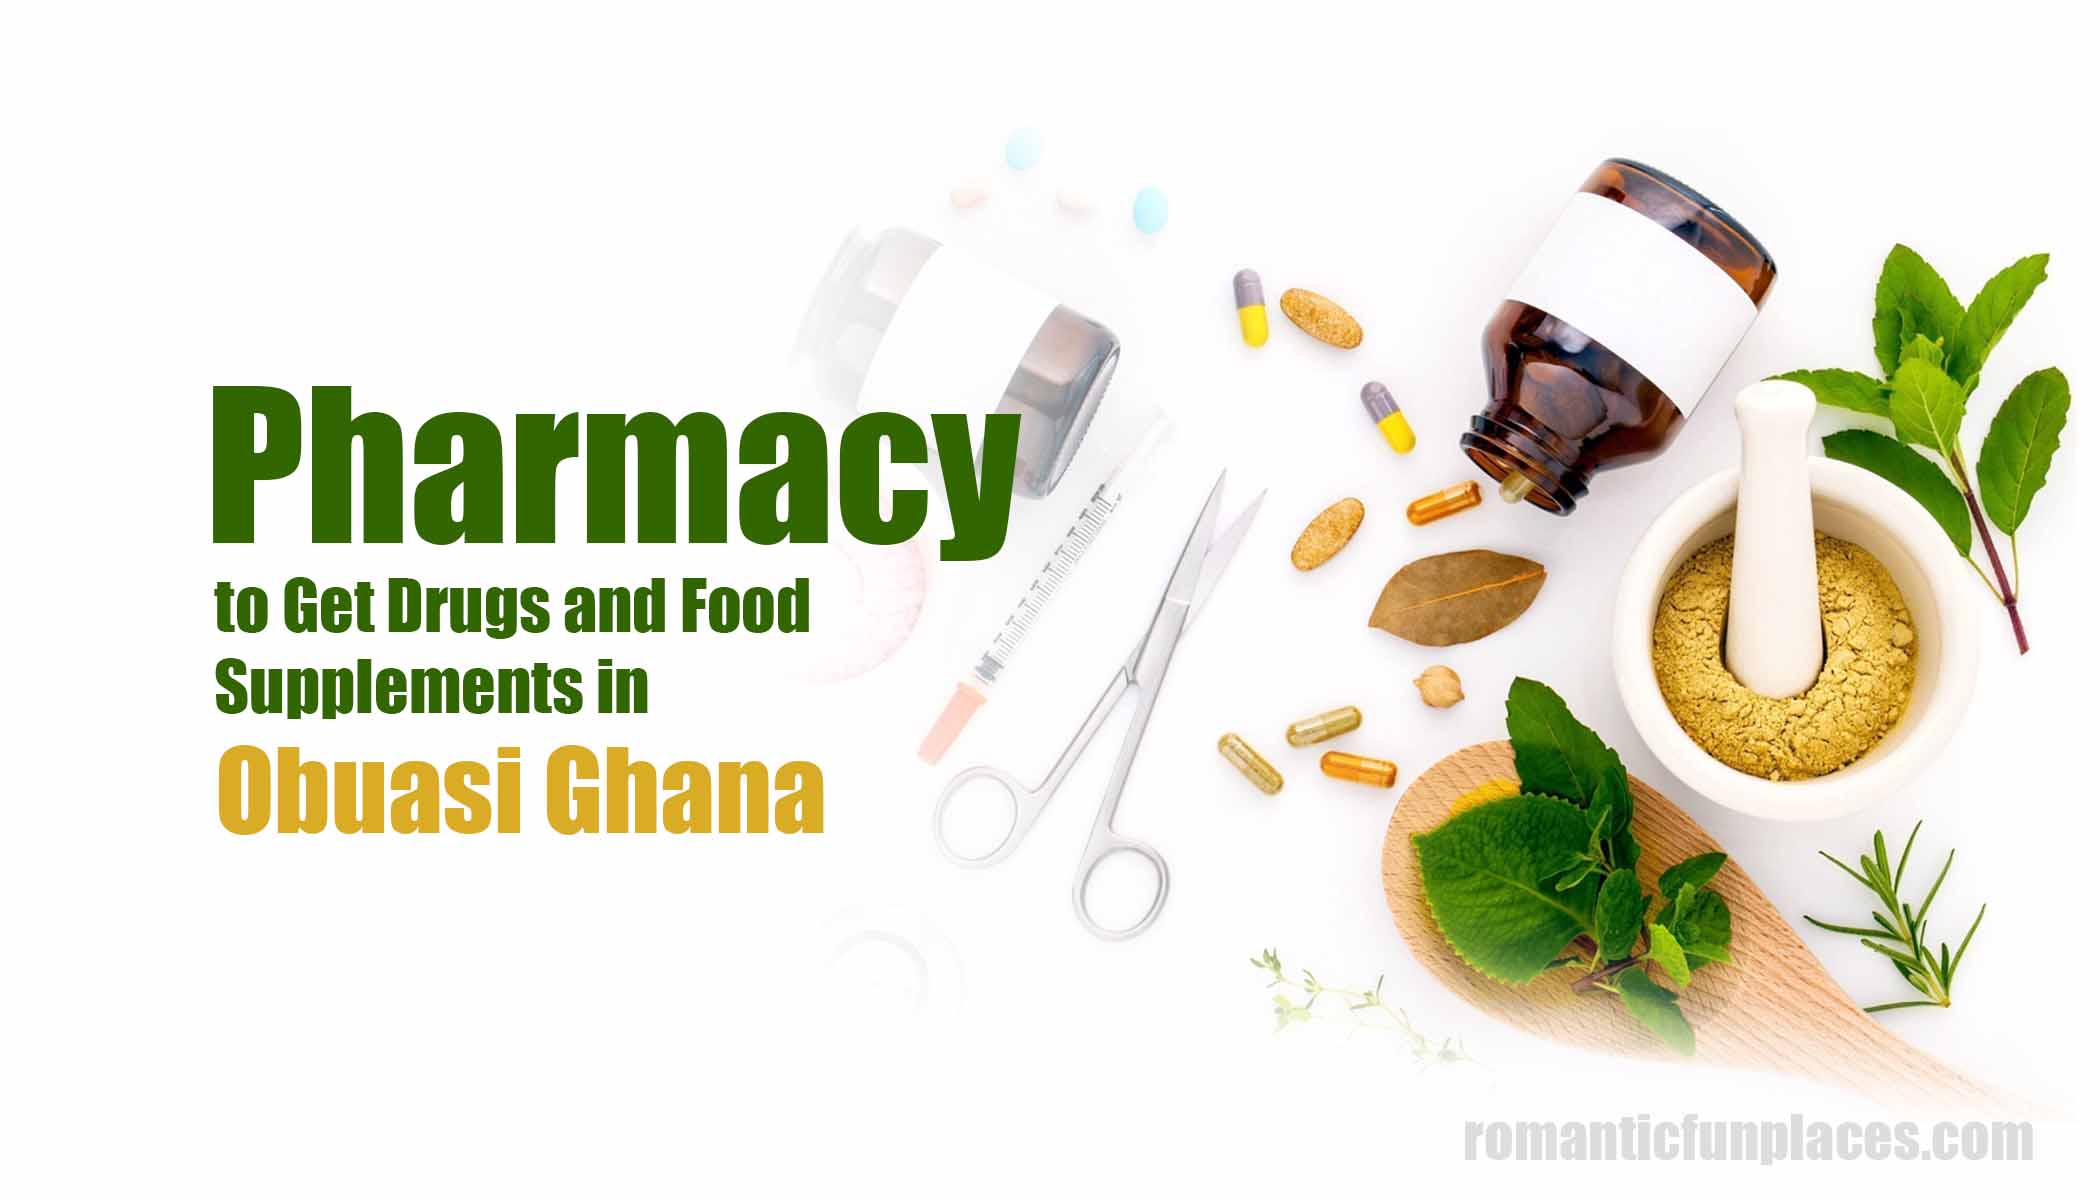 Pharmacy to Get Drugs and Food Supplements in Obuasi Ghana